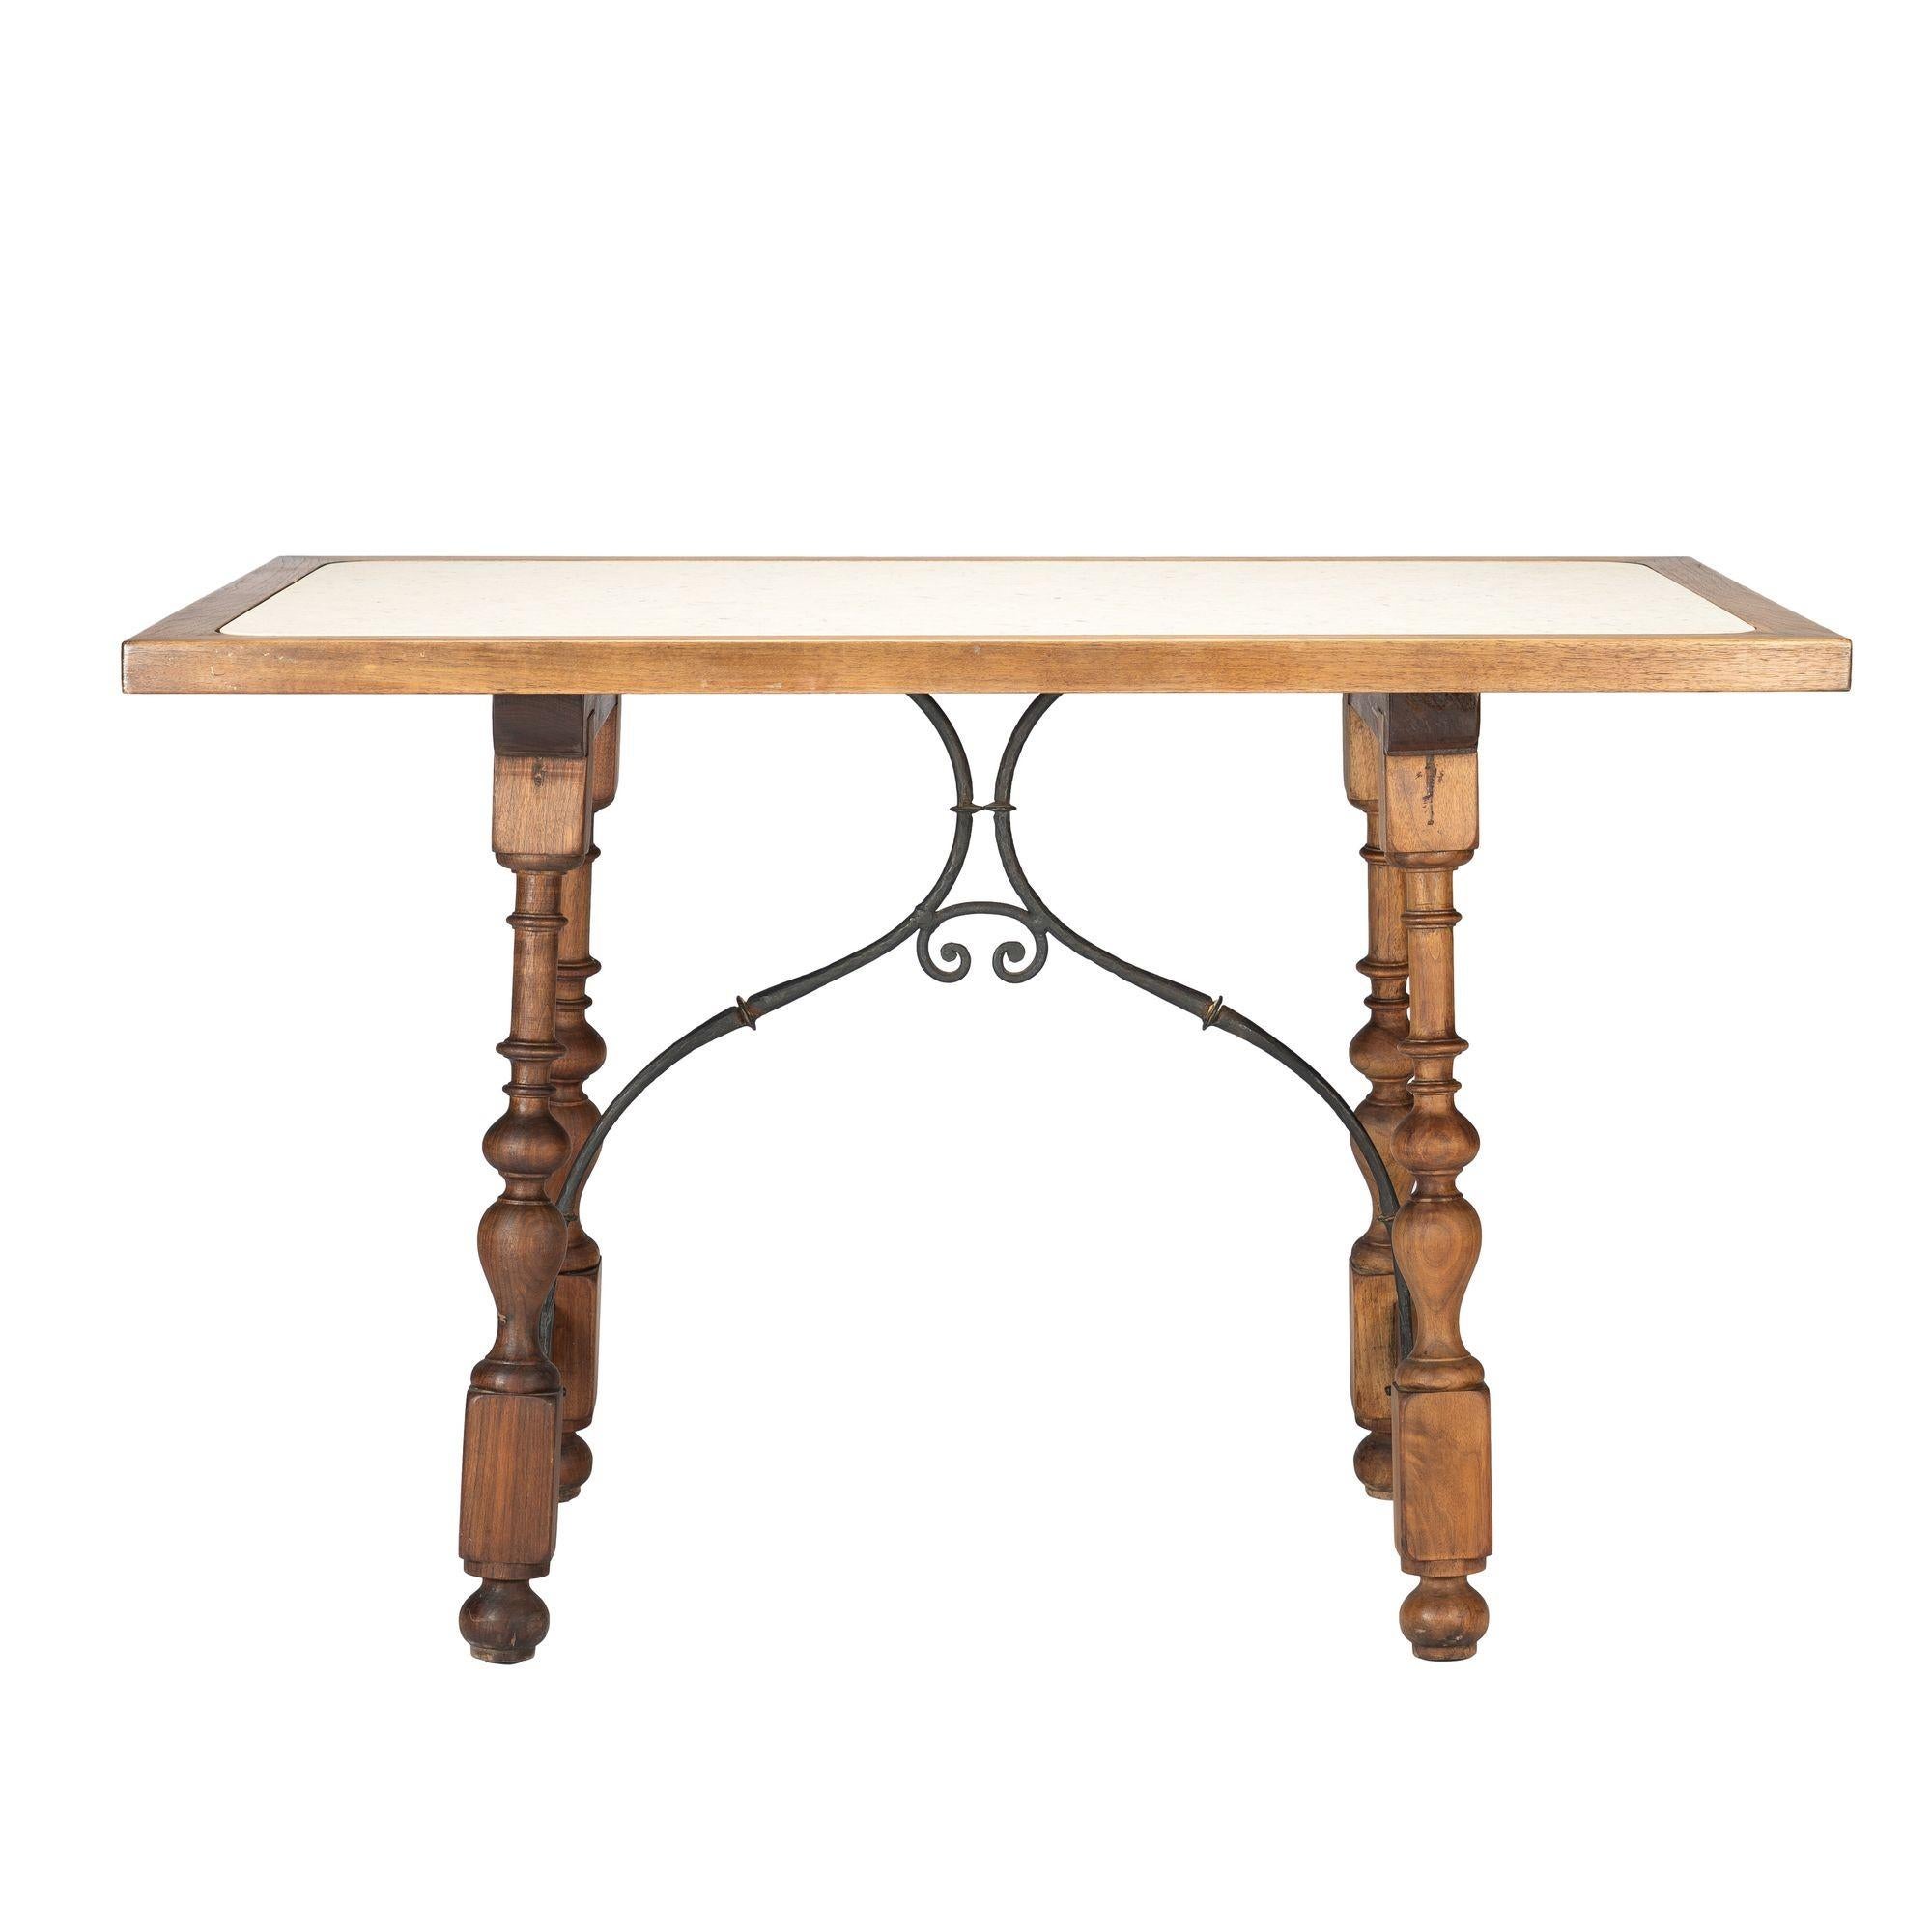 Spanish Baroque style walnut and travertine marble table. The travertine marble top is set in a walnut frame on four turned legs. The vigorously turned walnut legs are joined by turned stretchers and braced with a hand forged arched iron bracket in